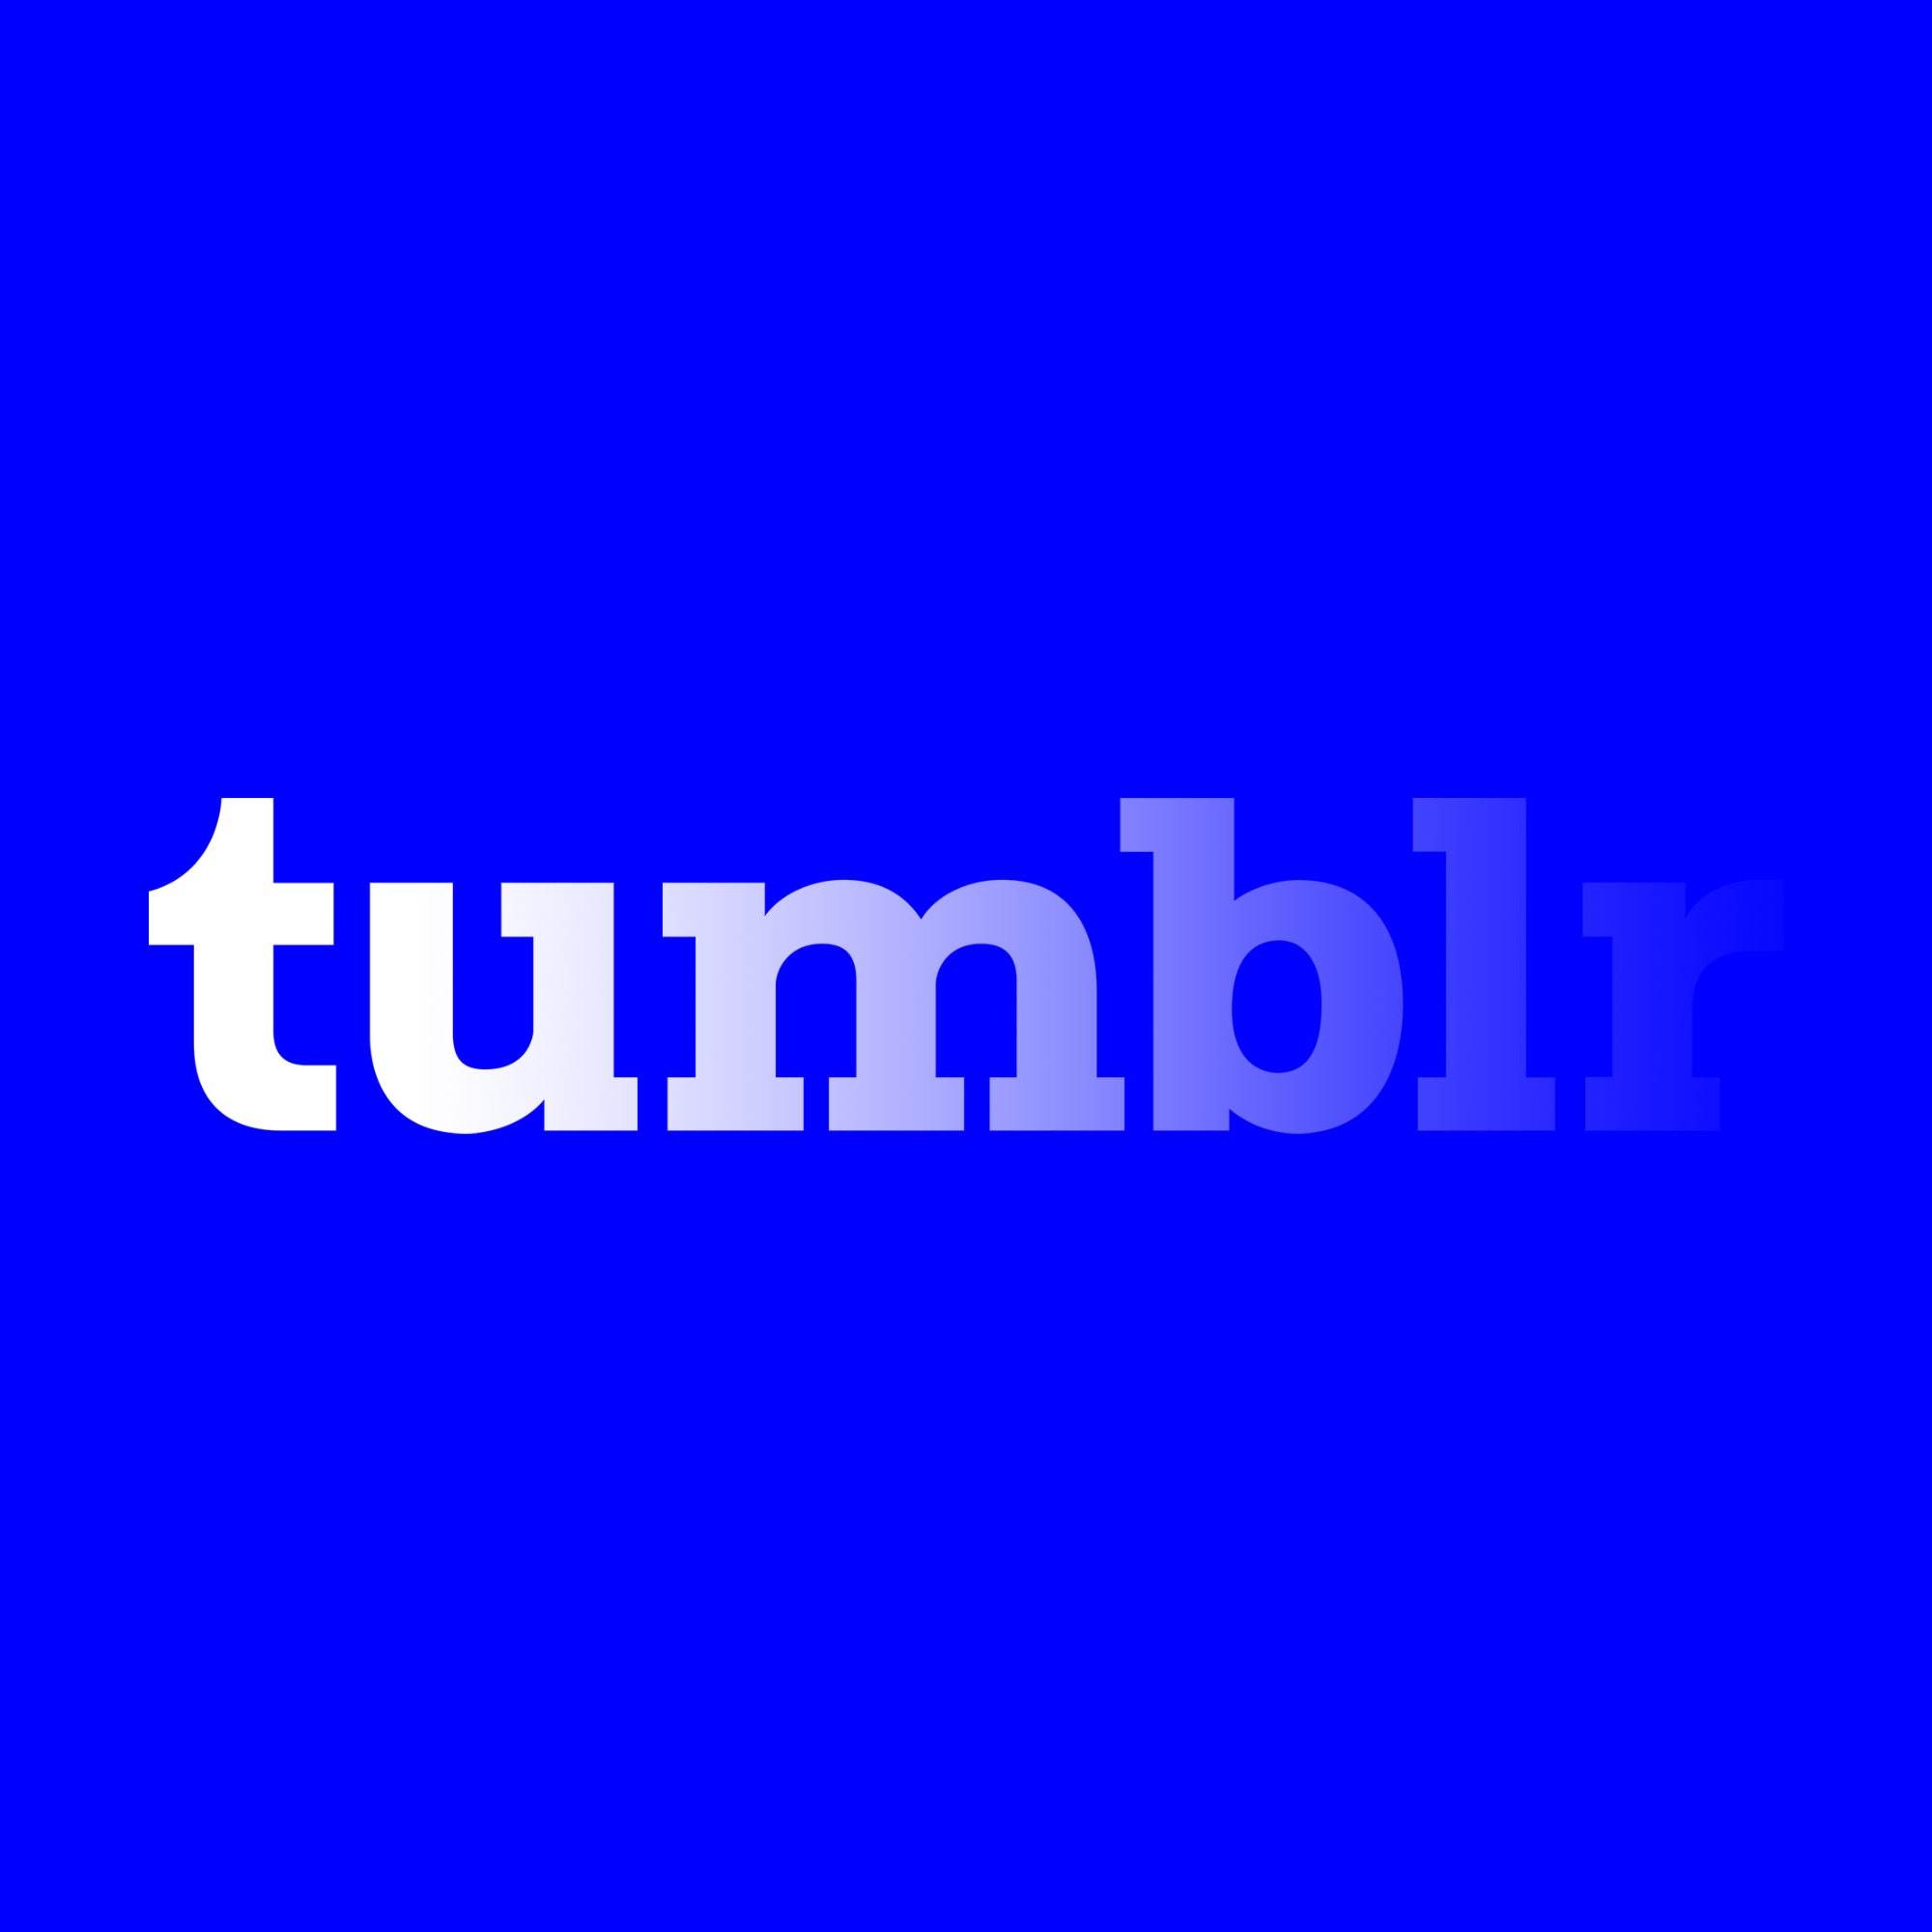 chandana swetha recommends forced gender change tumblr pic